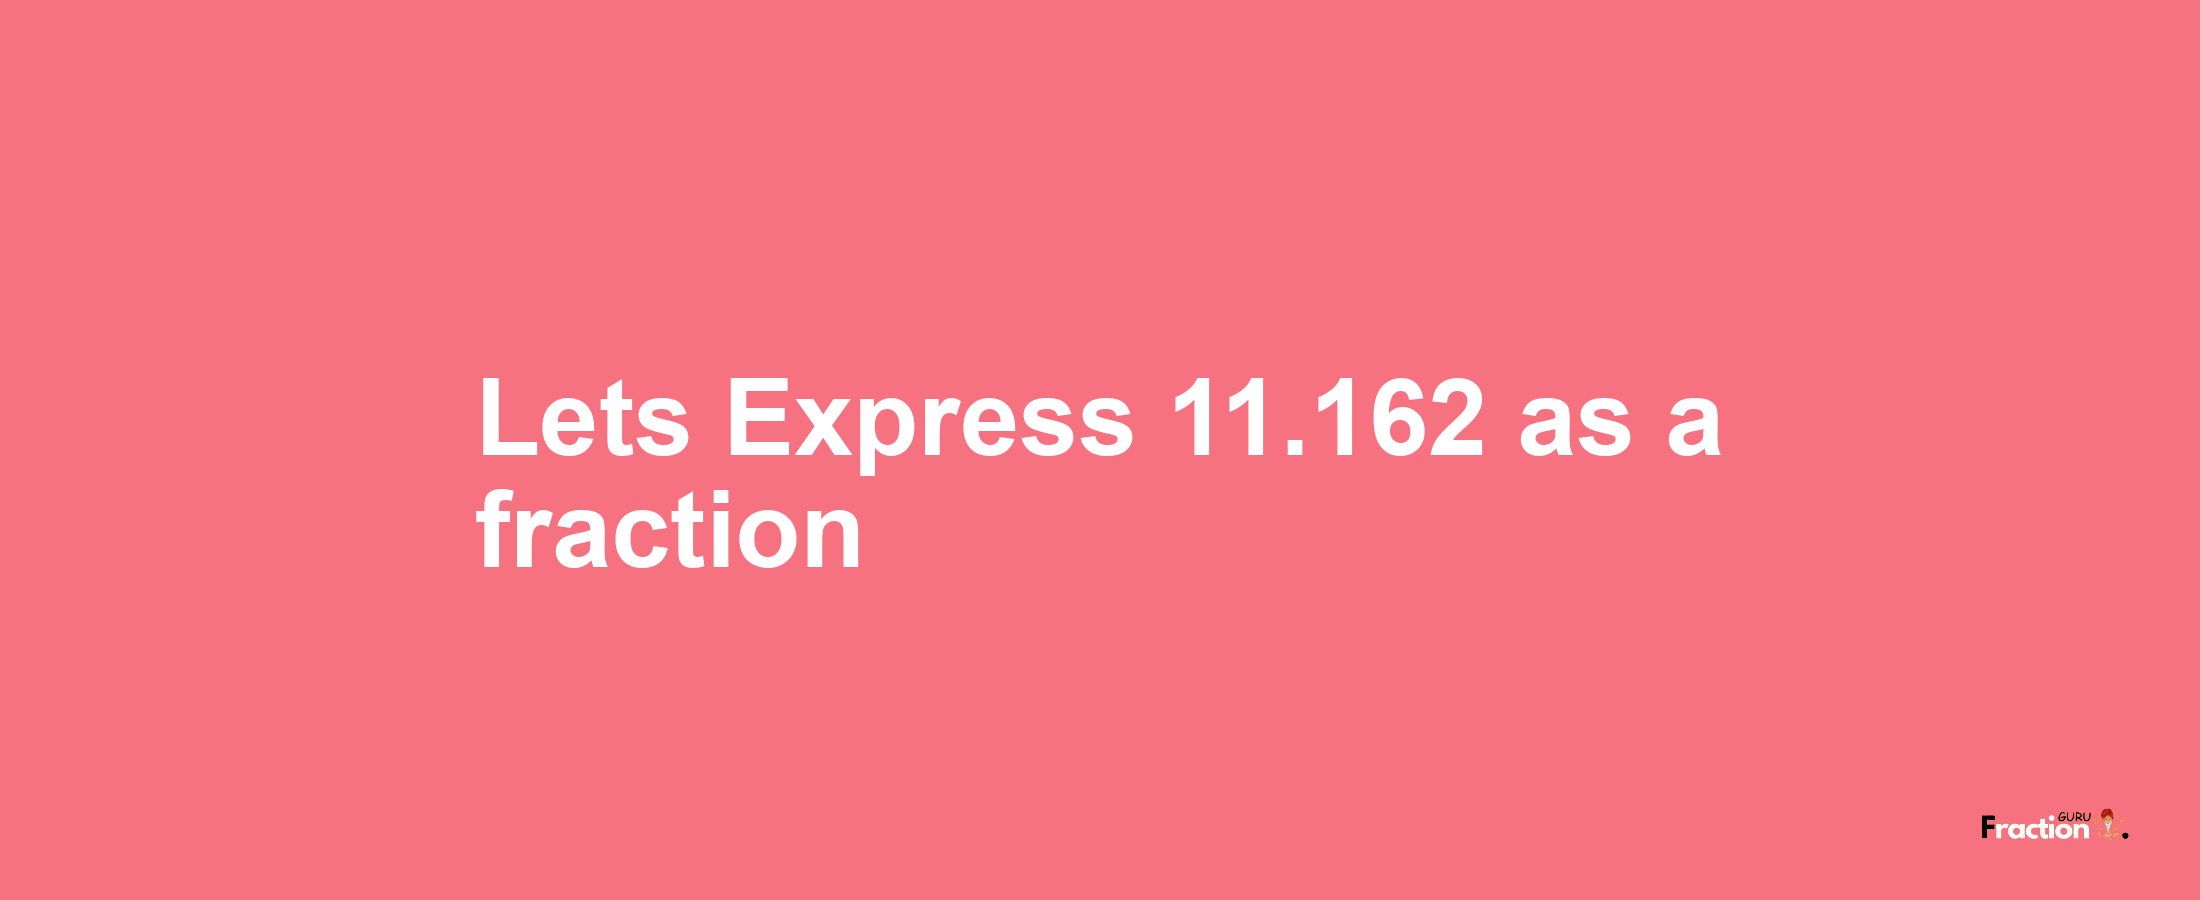 Lets Express 11.162 as afraction